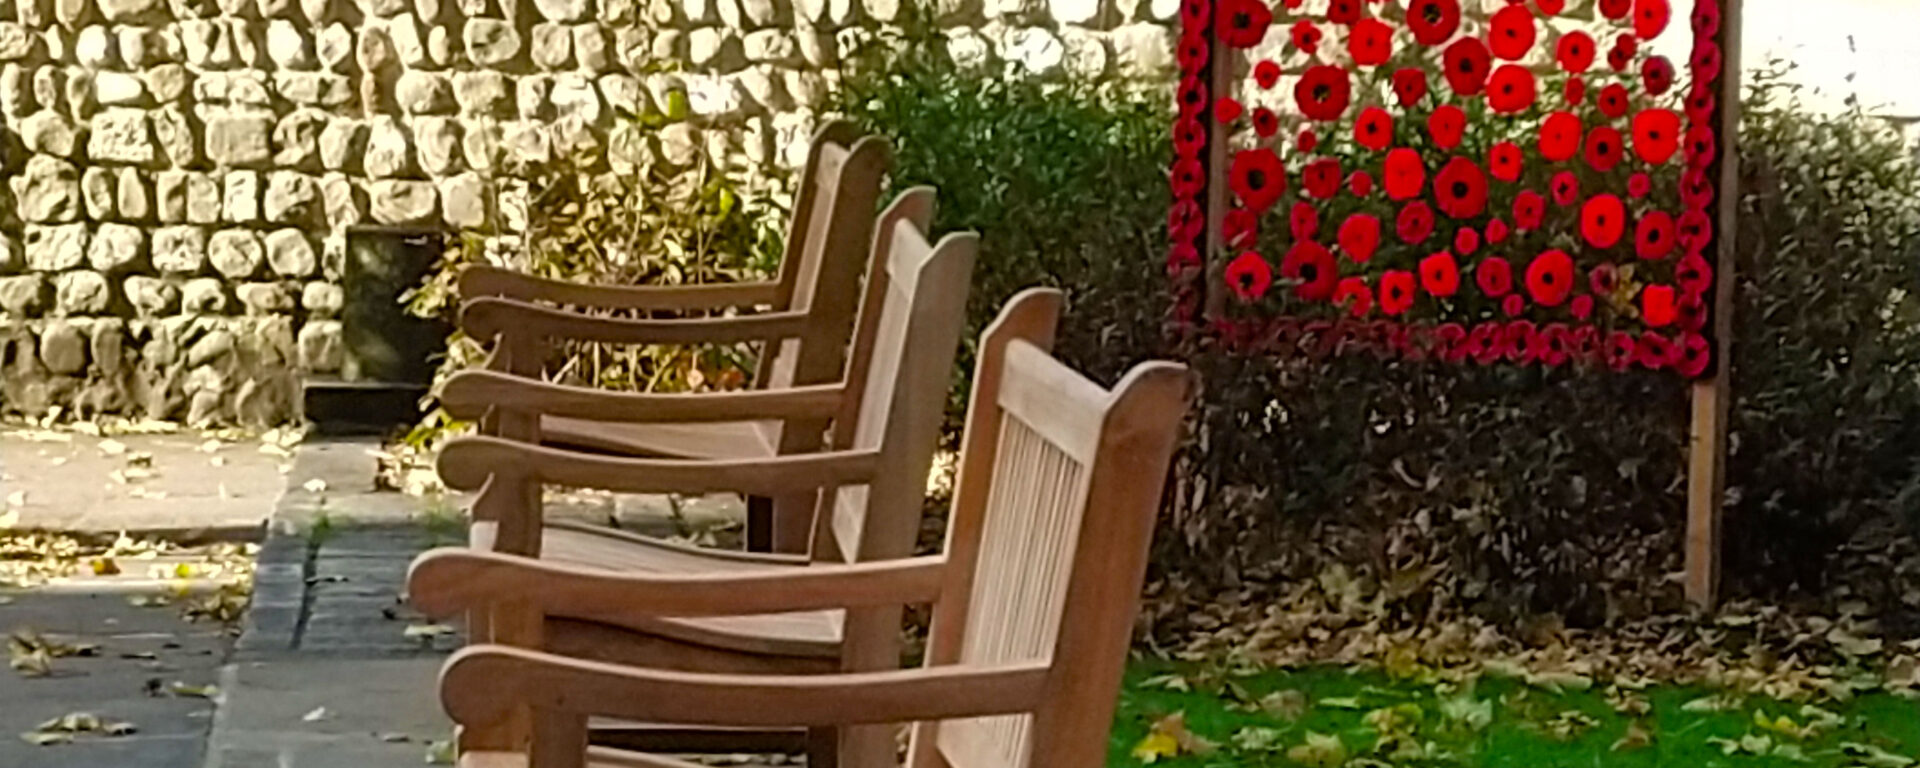 a row of remembrance day benches